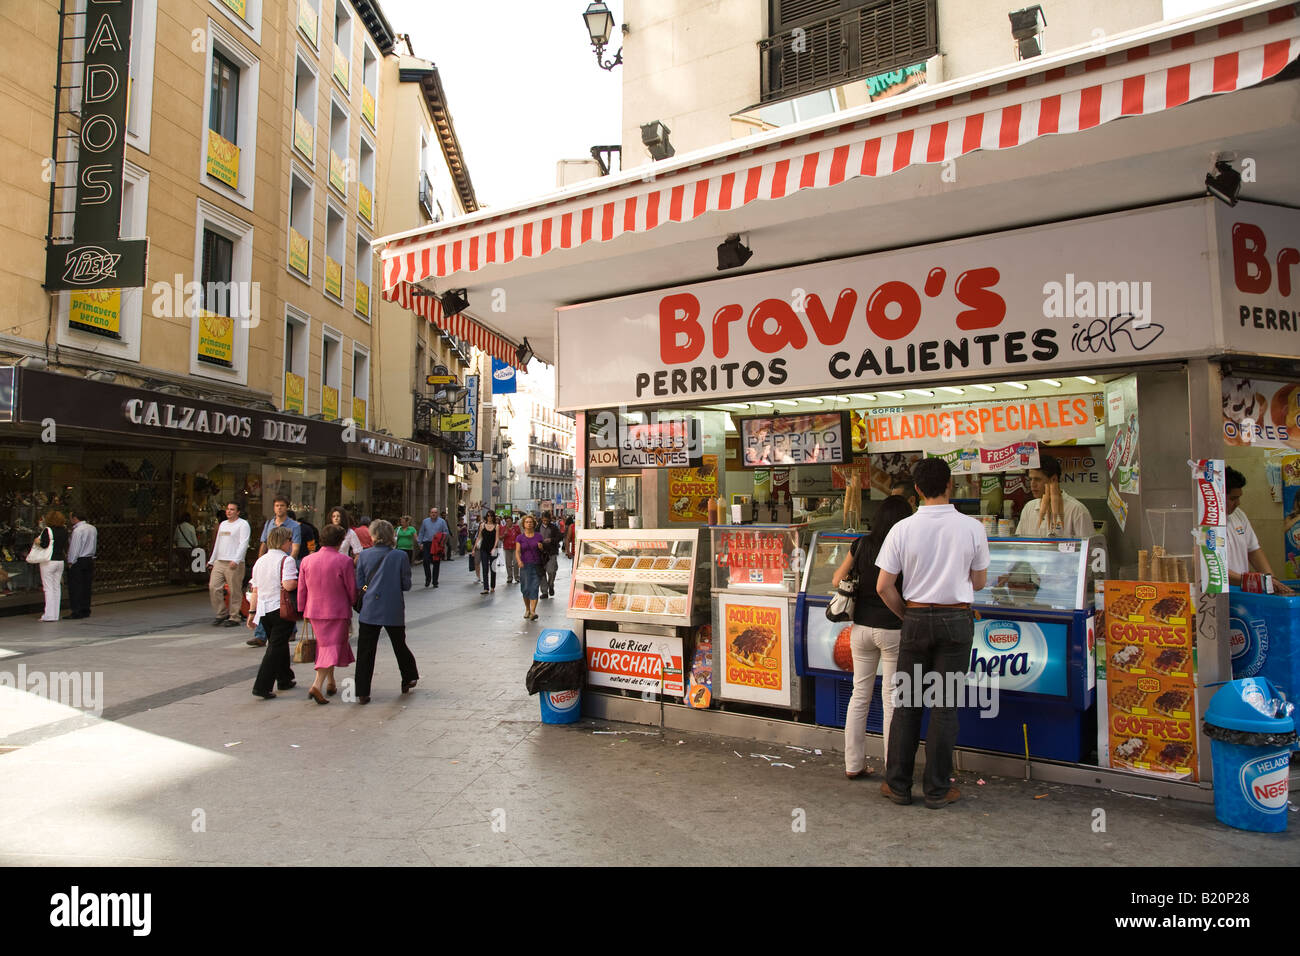 SPAIN Madrid Customers visit hot dog stand on Calle de Preciados in downtown shopping district perritos calientes in Spanish Stock Photo